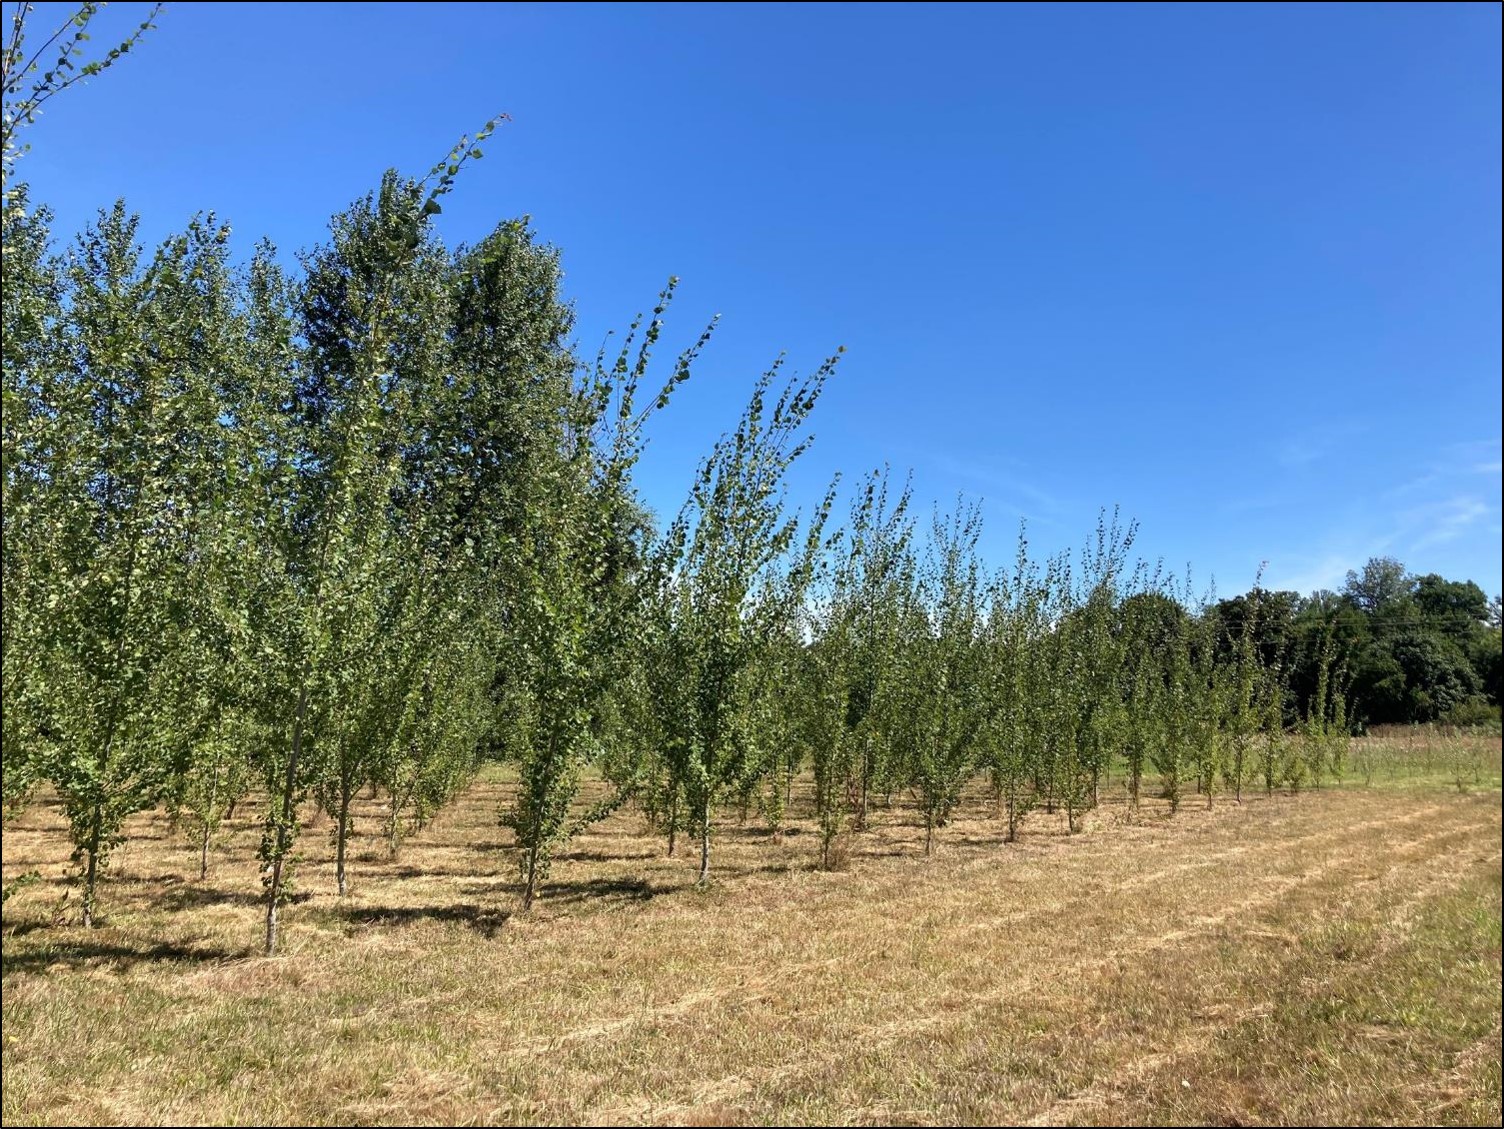 A field trial of transgenic, CRISPR-modified poplars to study genetic containment